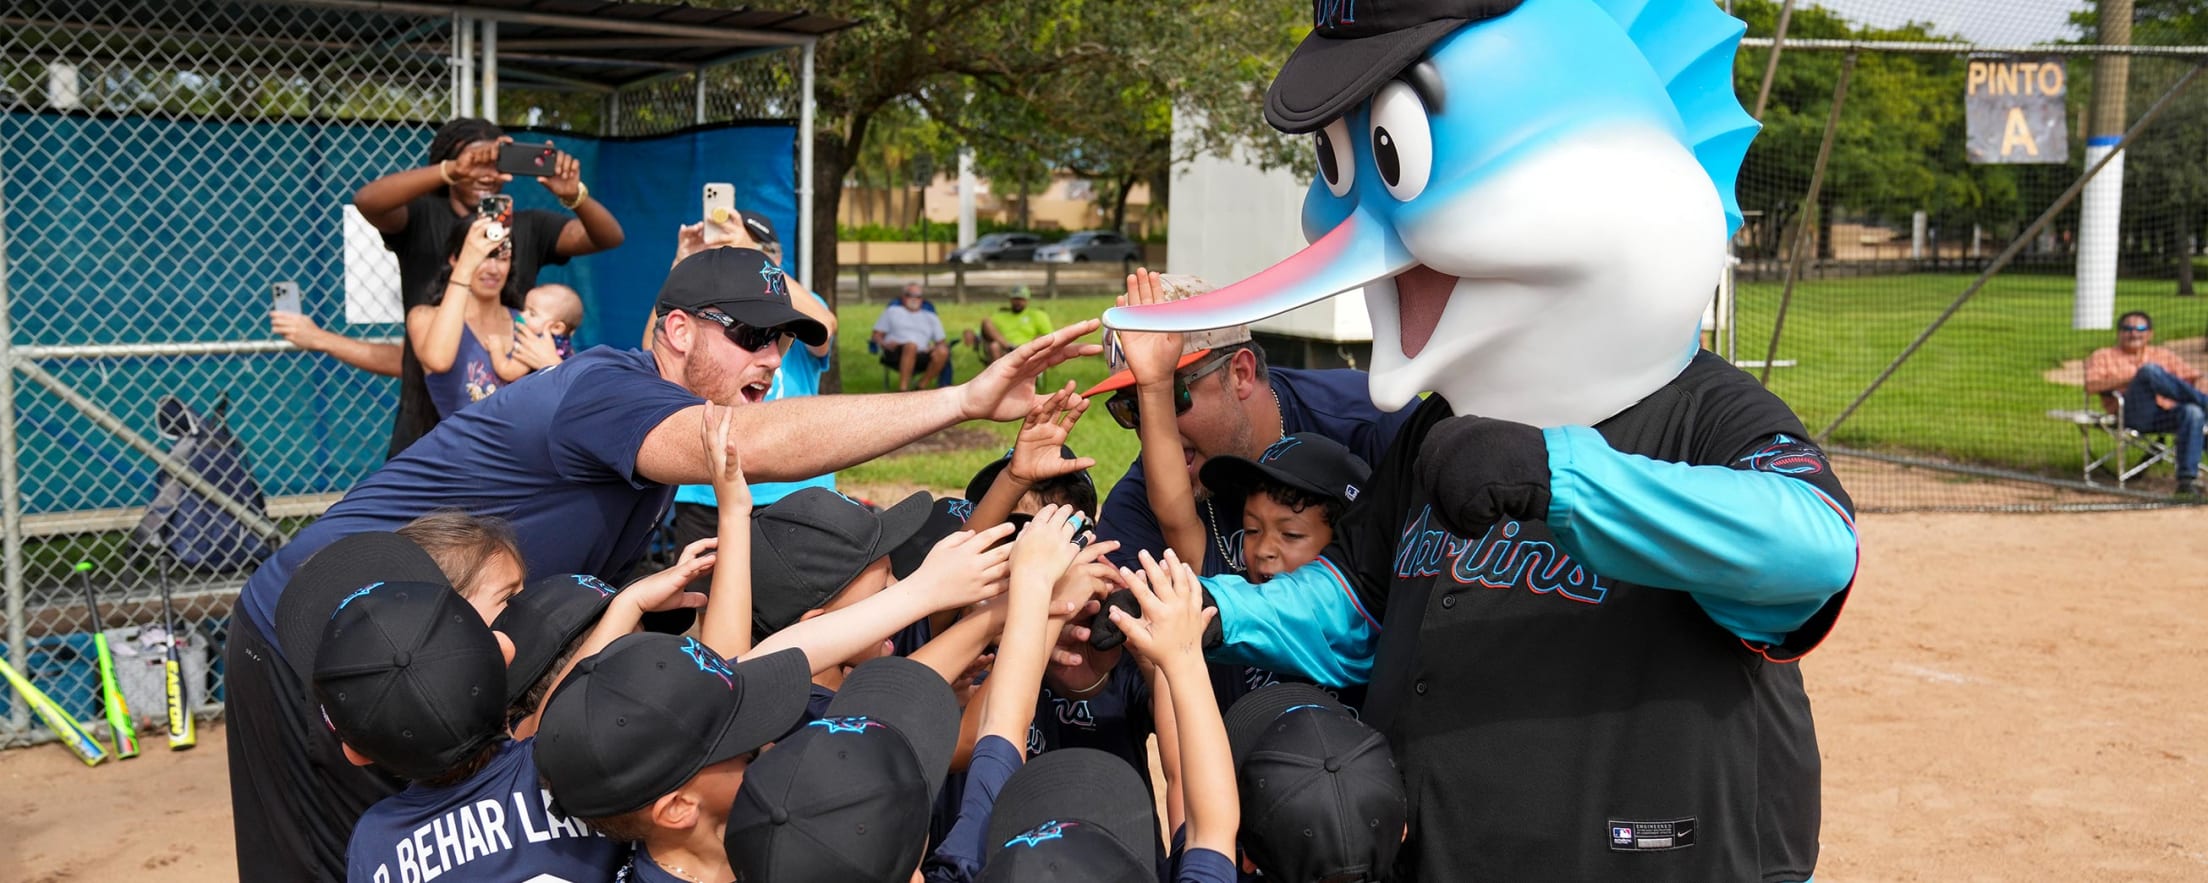 Marlins Youth Academy Spring Tee Ball Initiative